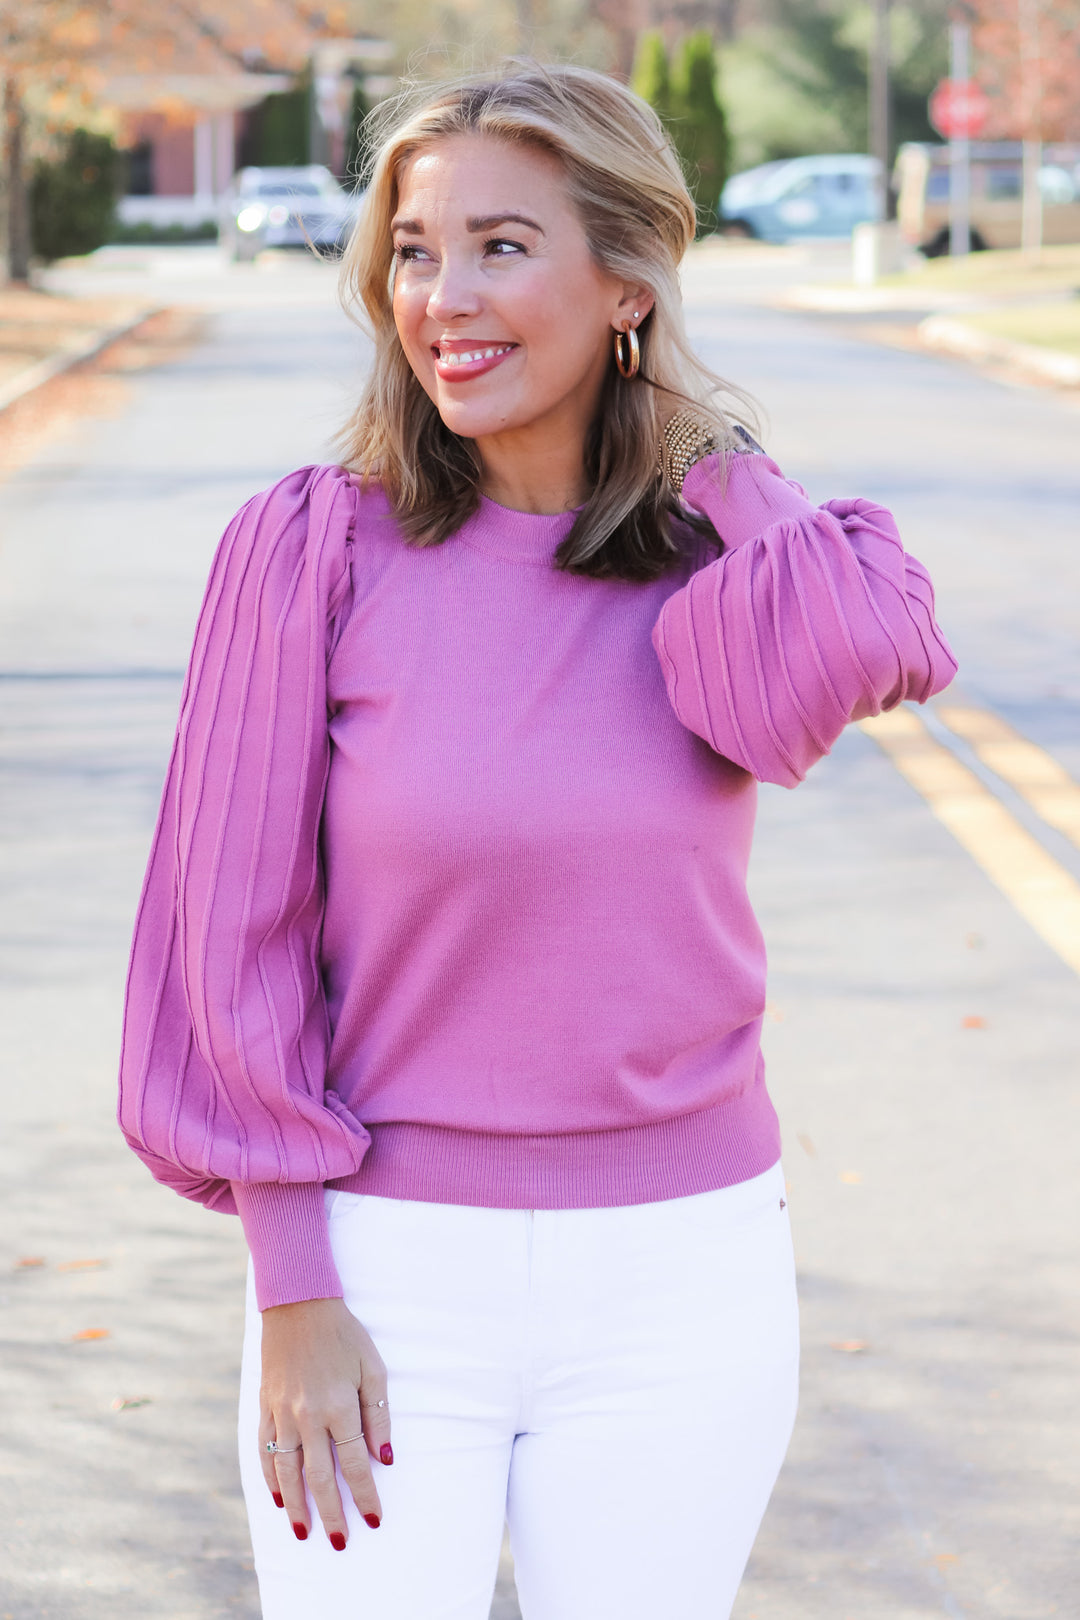 A blonde woman standing outside wearing a pink detailed long sleeve sweater and white jeans.